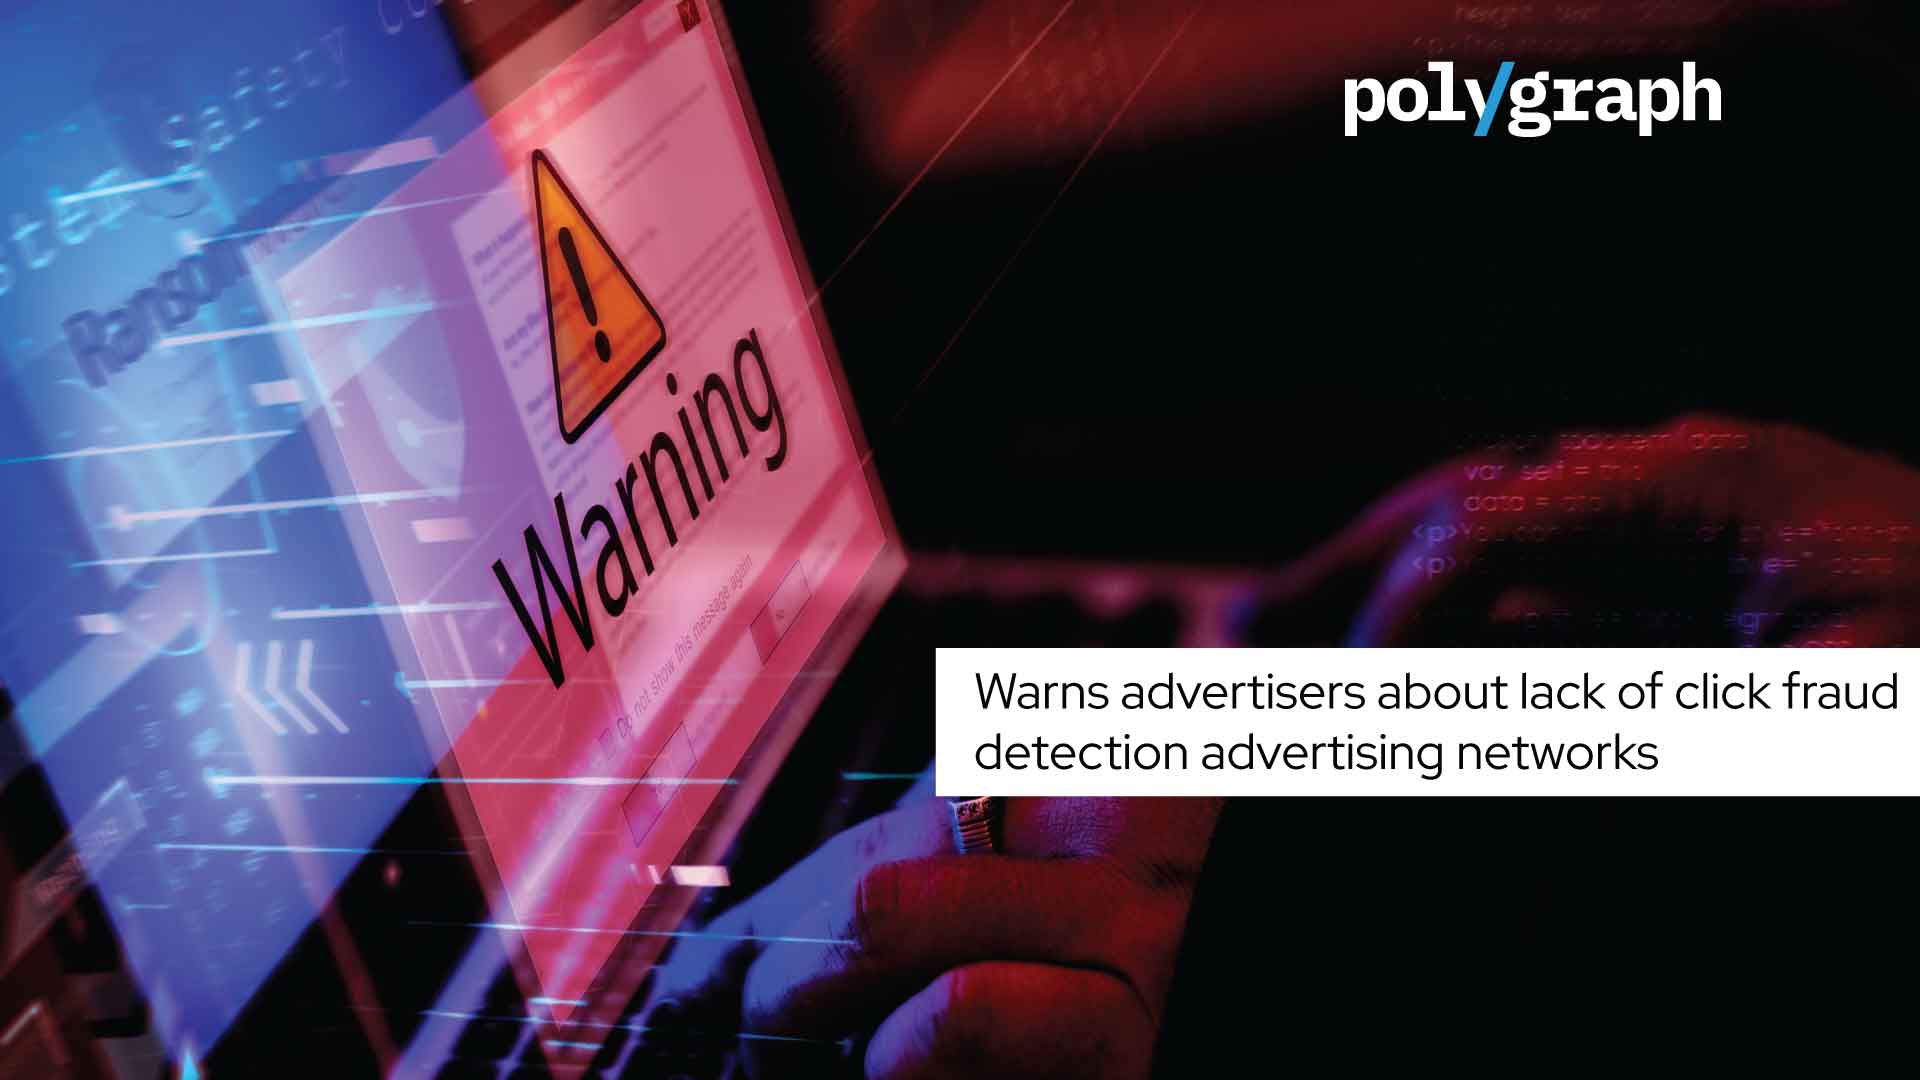 Polygraph: Don't Rely On Advertising Networks To Protect Your Ads From Click Fraud